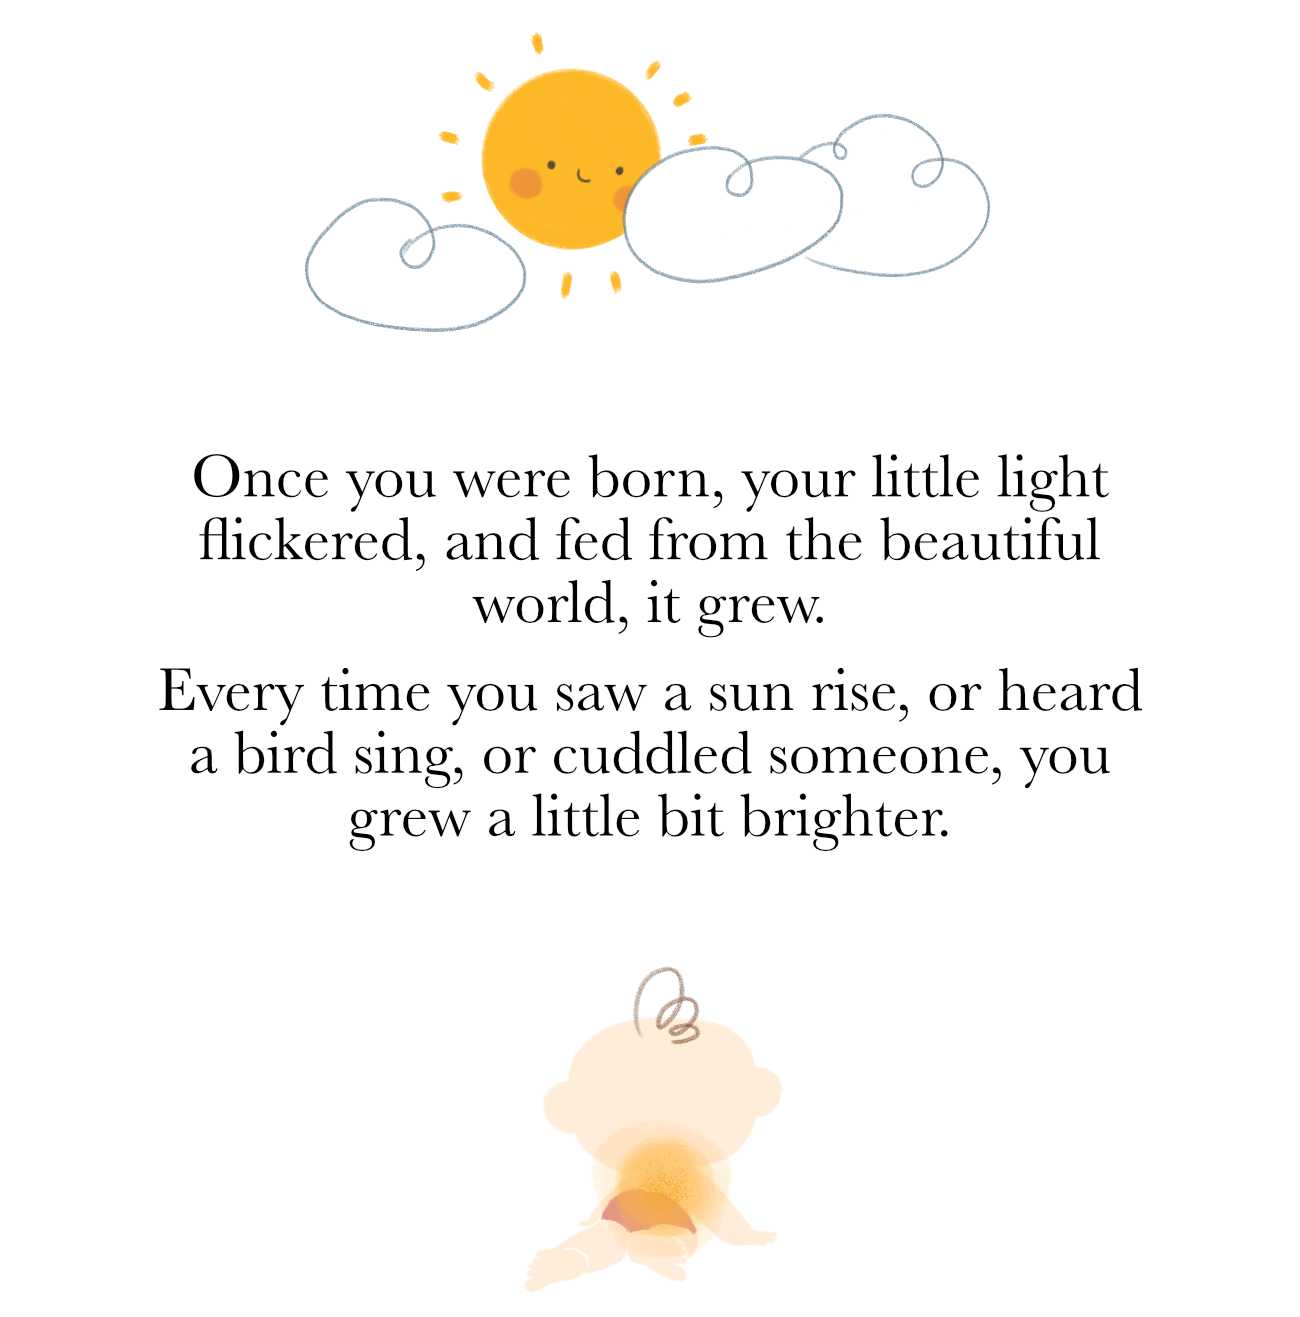 Bedtime stories Your Magic Light by Jade Maitre short stories for kids page 6